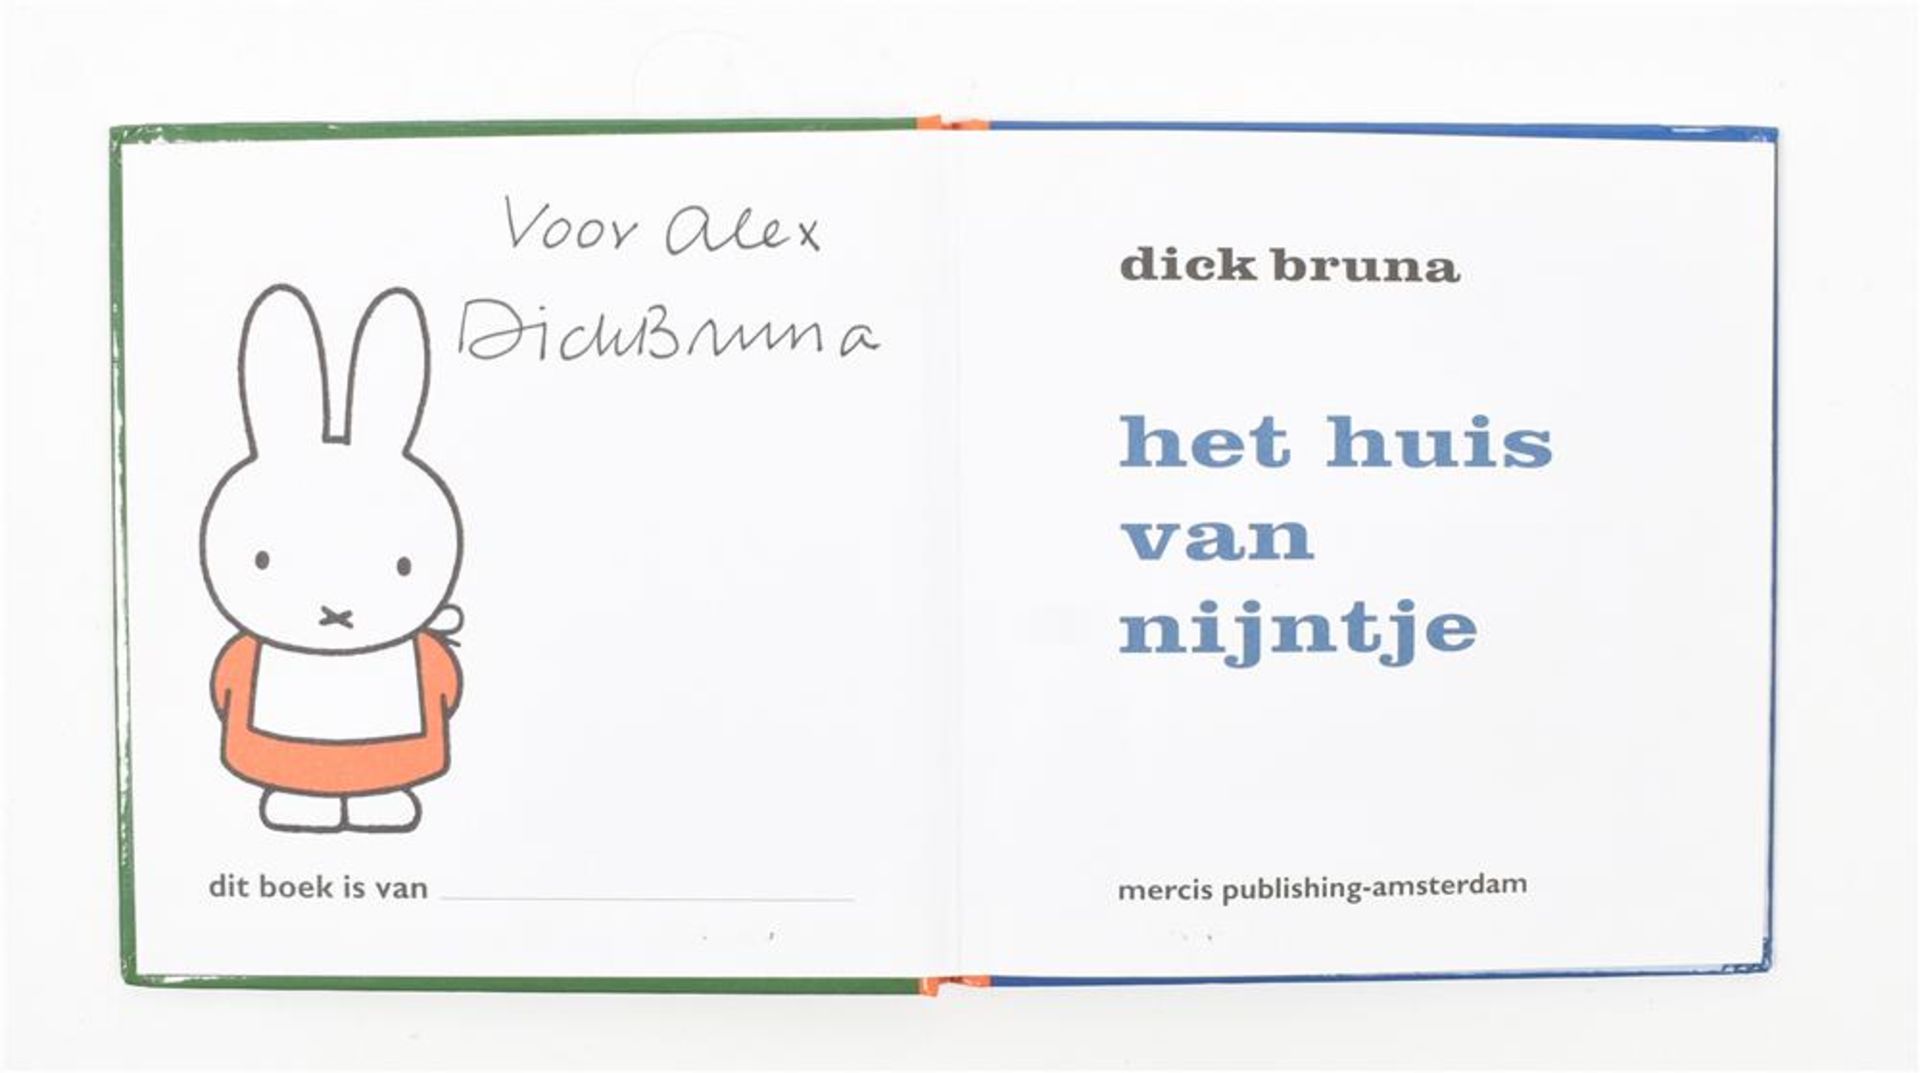 Bruna, D. Signed copy of Rond, vierkant, driehoekig - Image 9 of 10